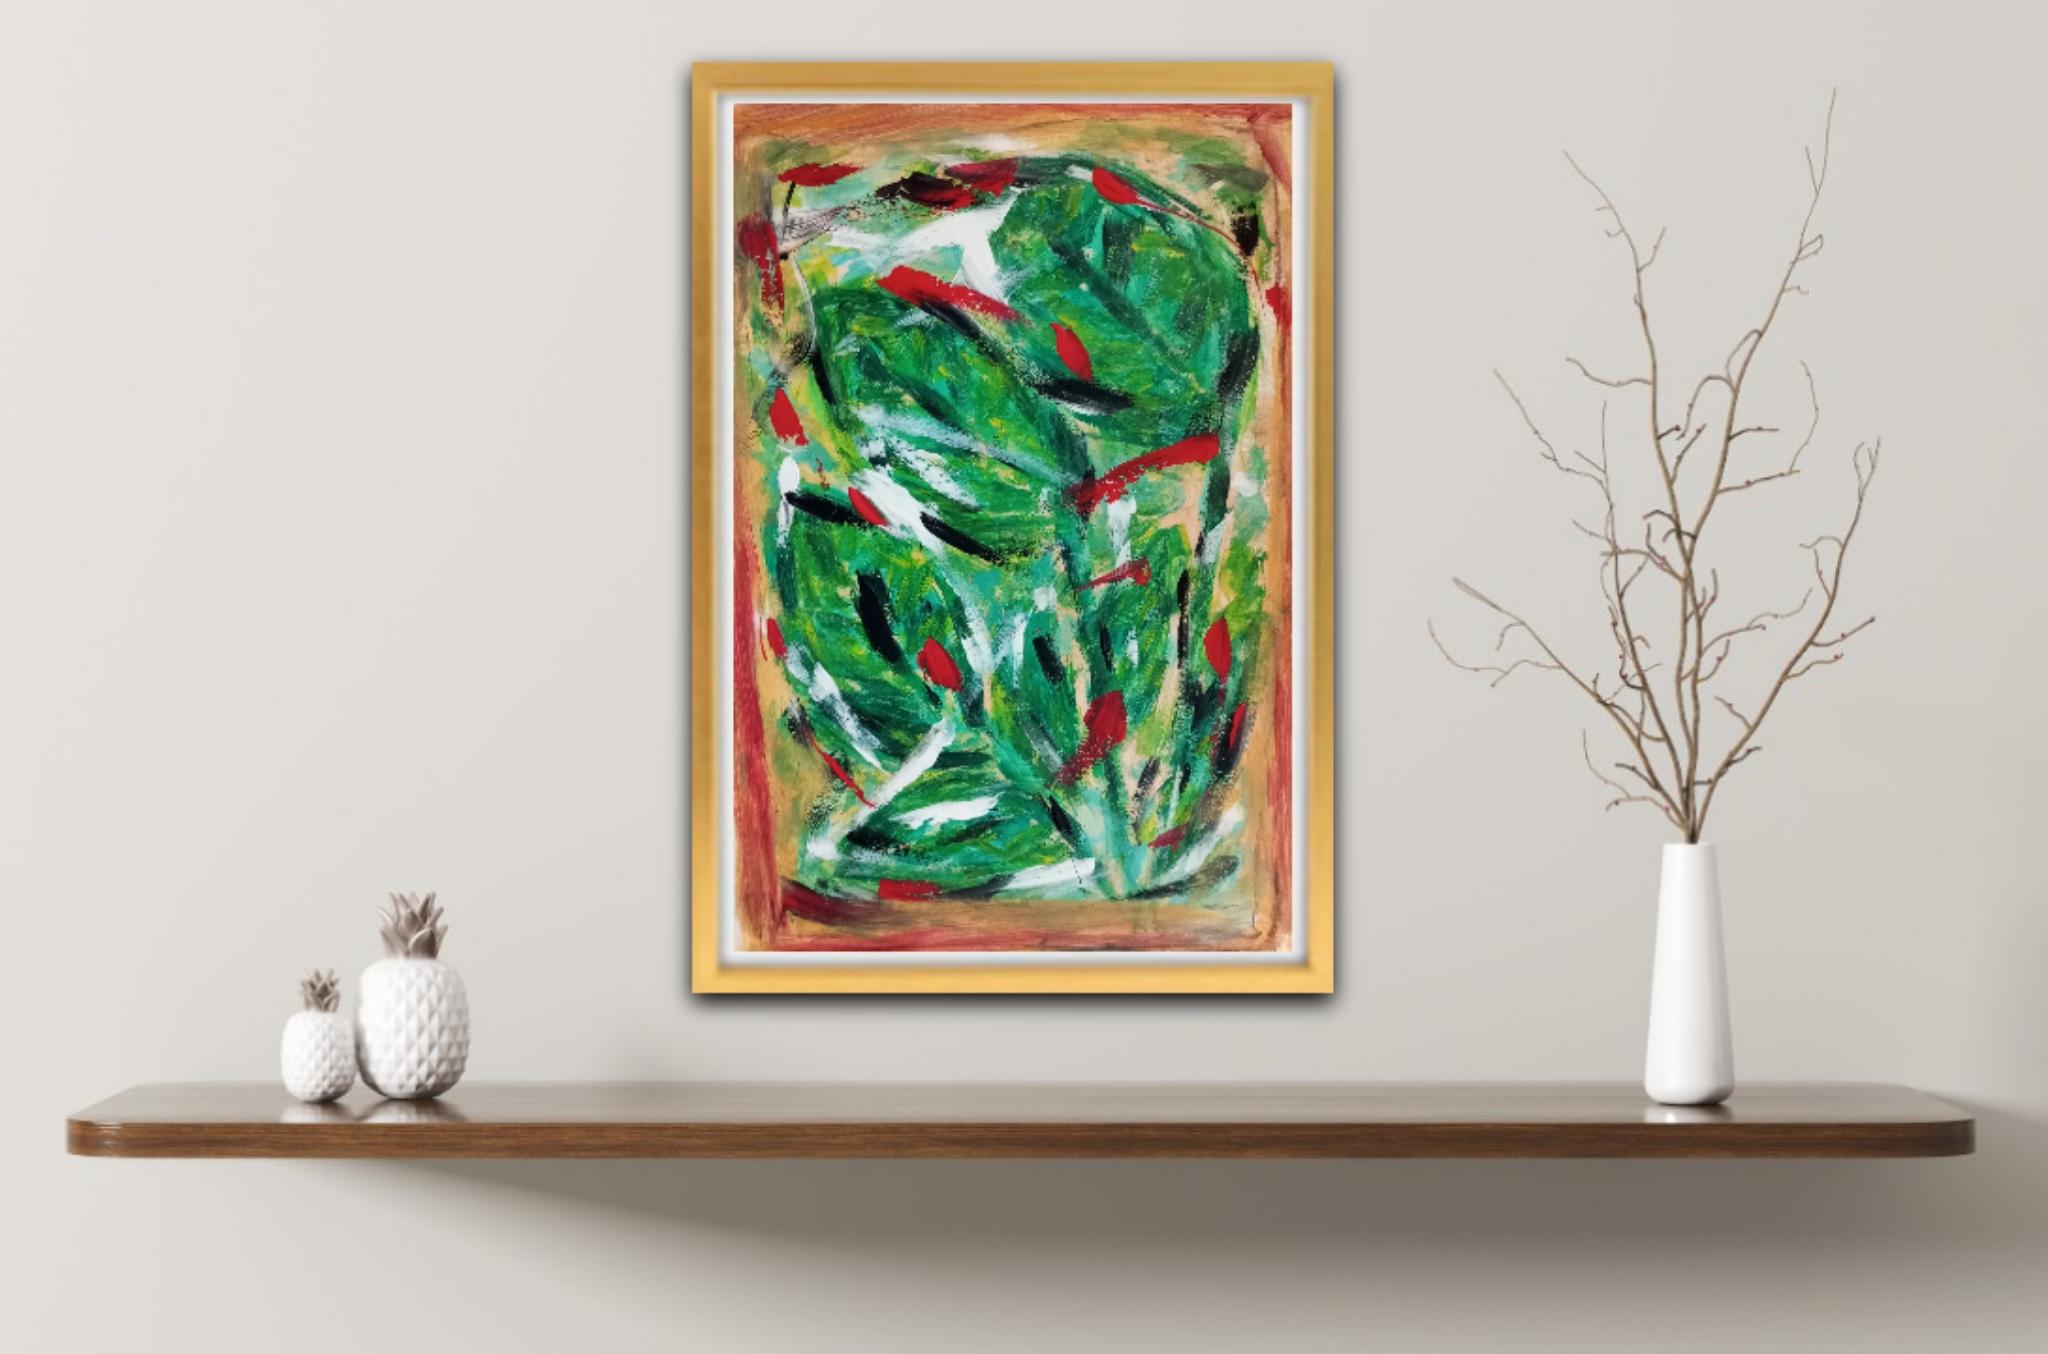 Dear art lover,

This expressive vibrant abstract painting with green dominant color is called 